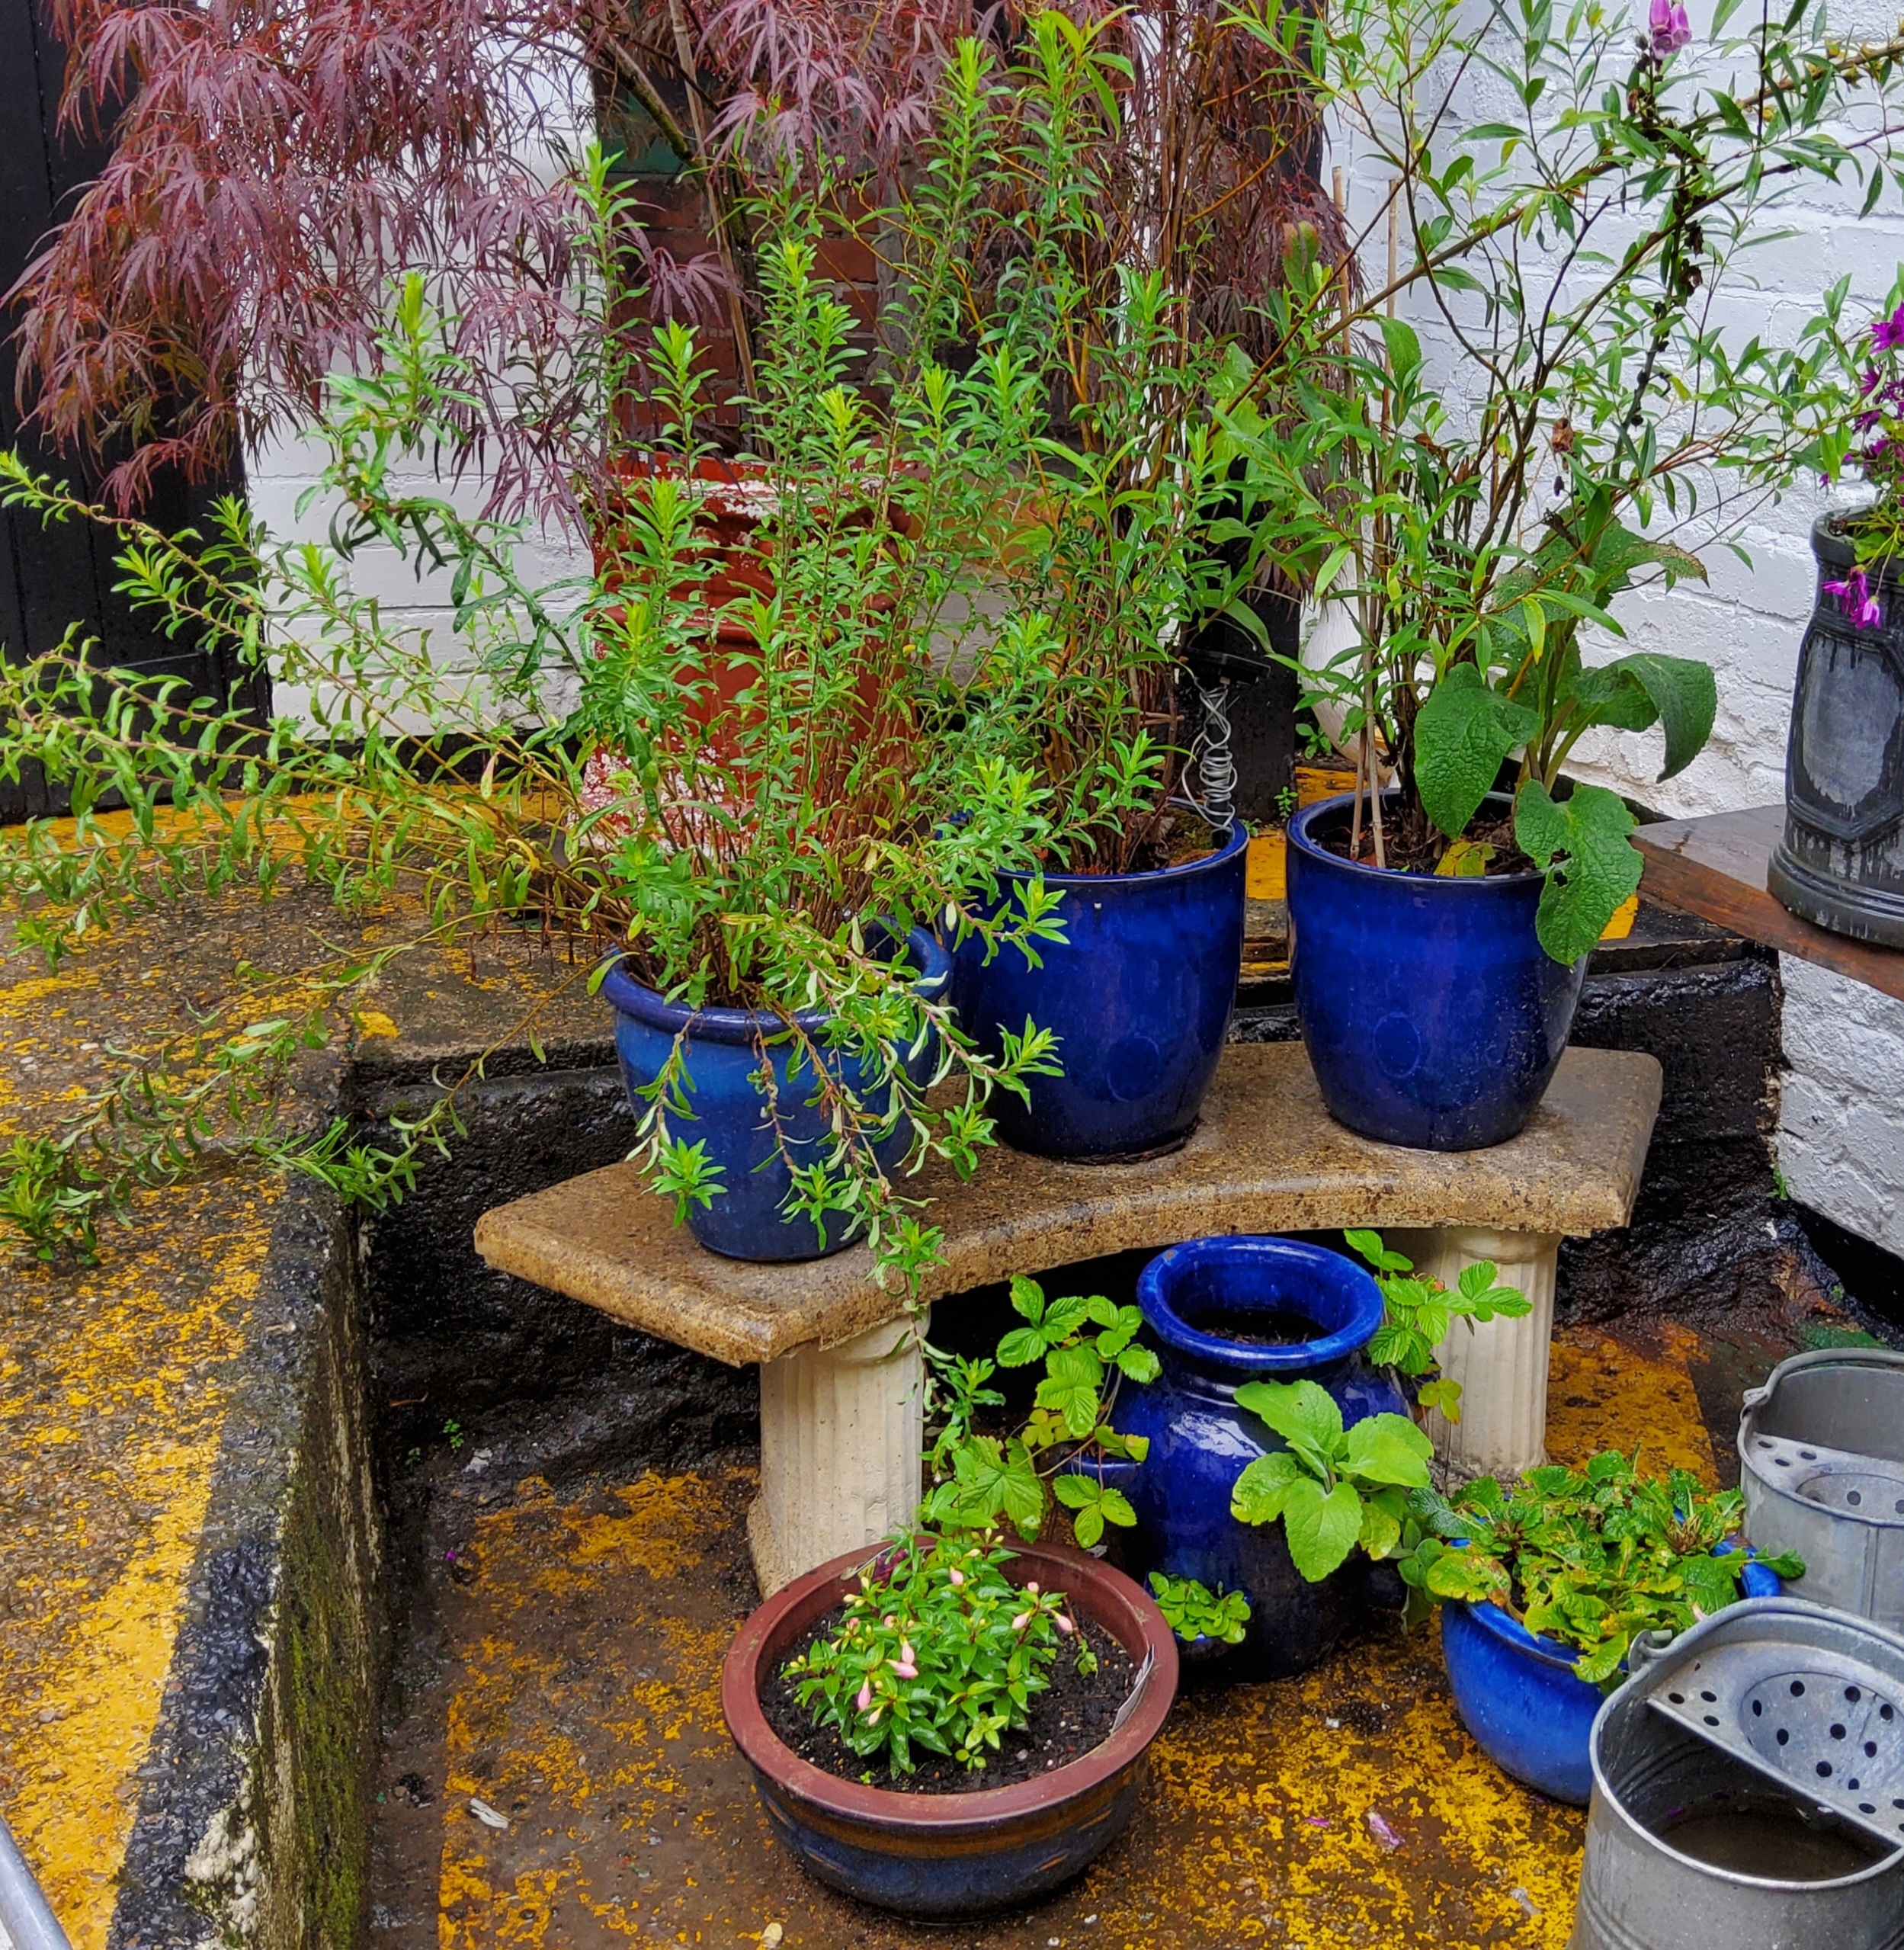 Six blue drip glazed plant pots, including a strawberry planter with mature plants